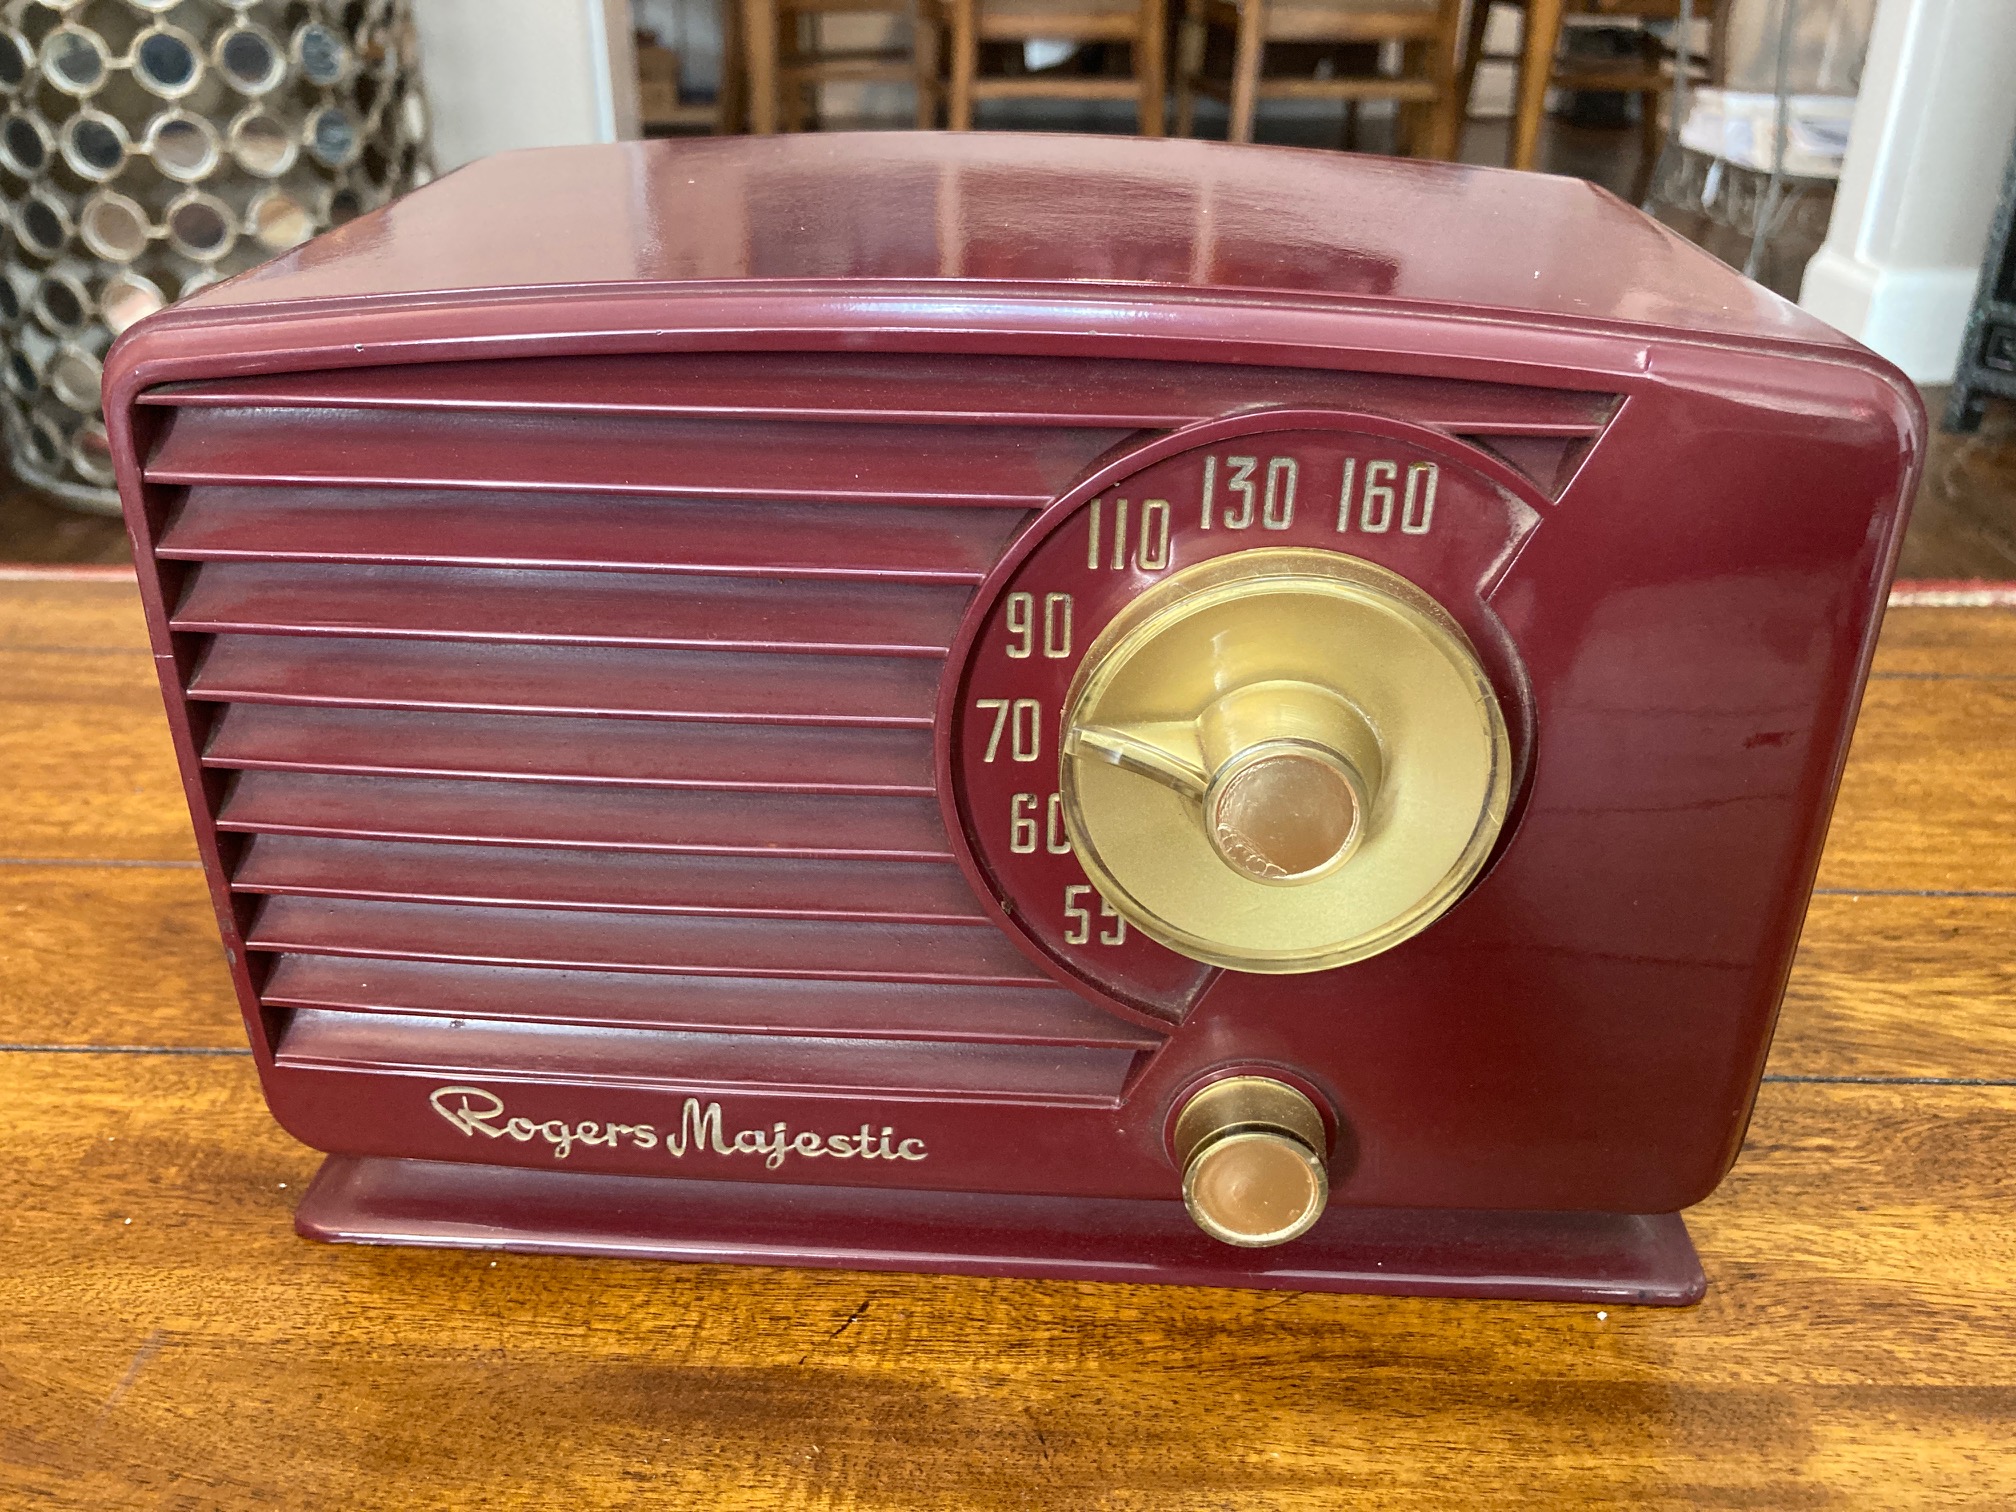 1954 Rogers Majestic R531 Brick Red